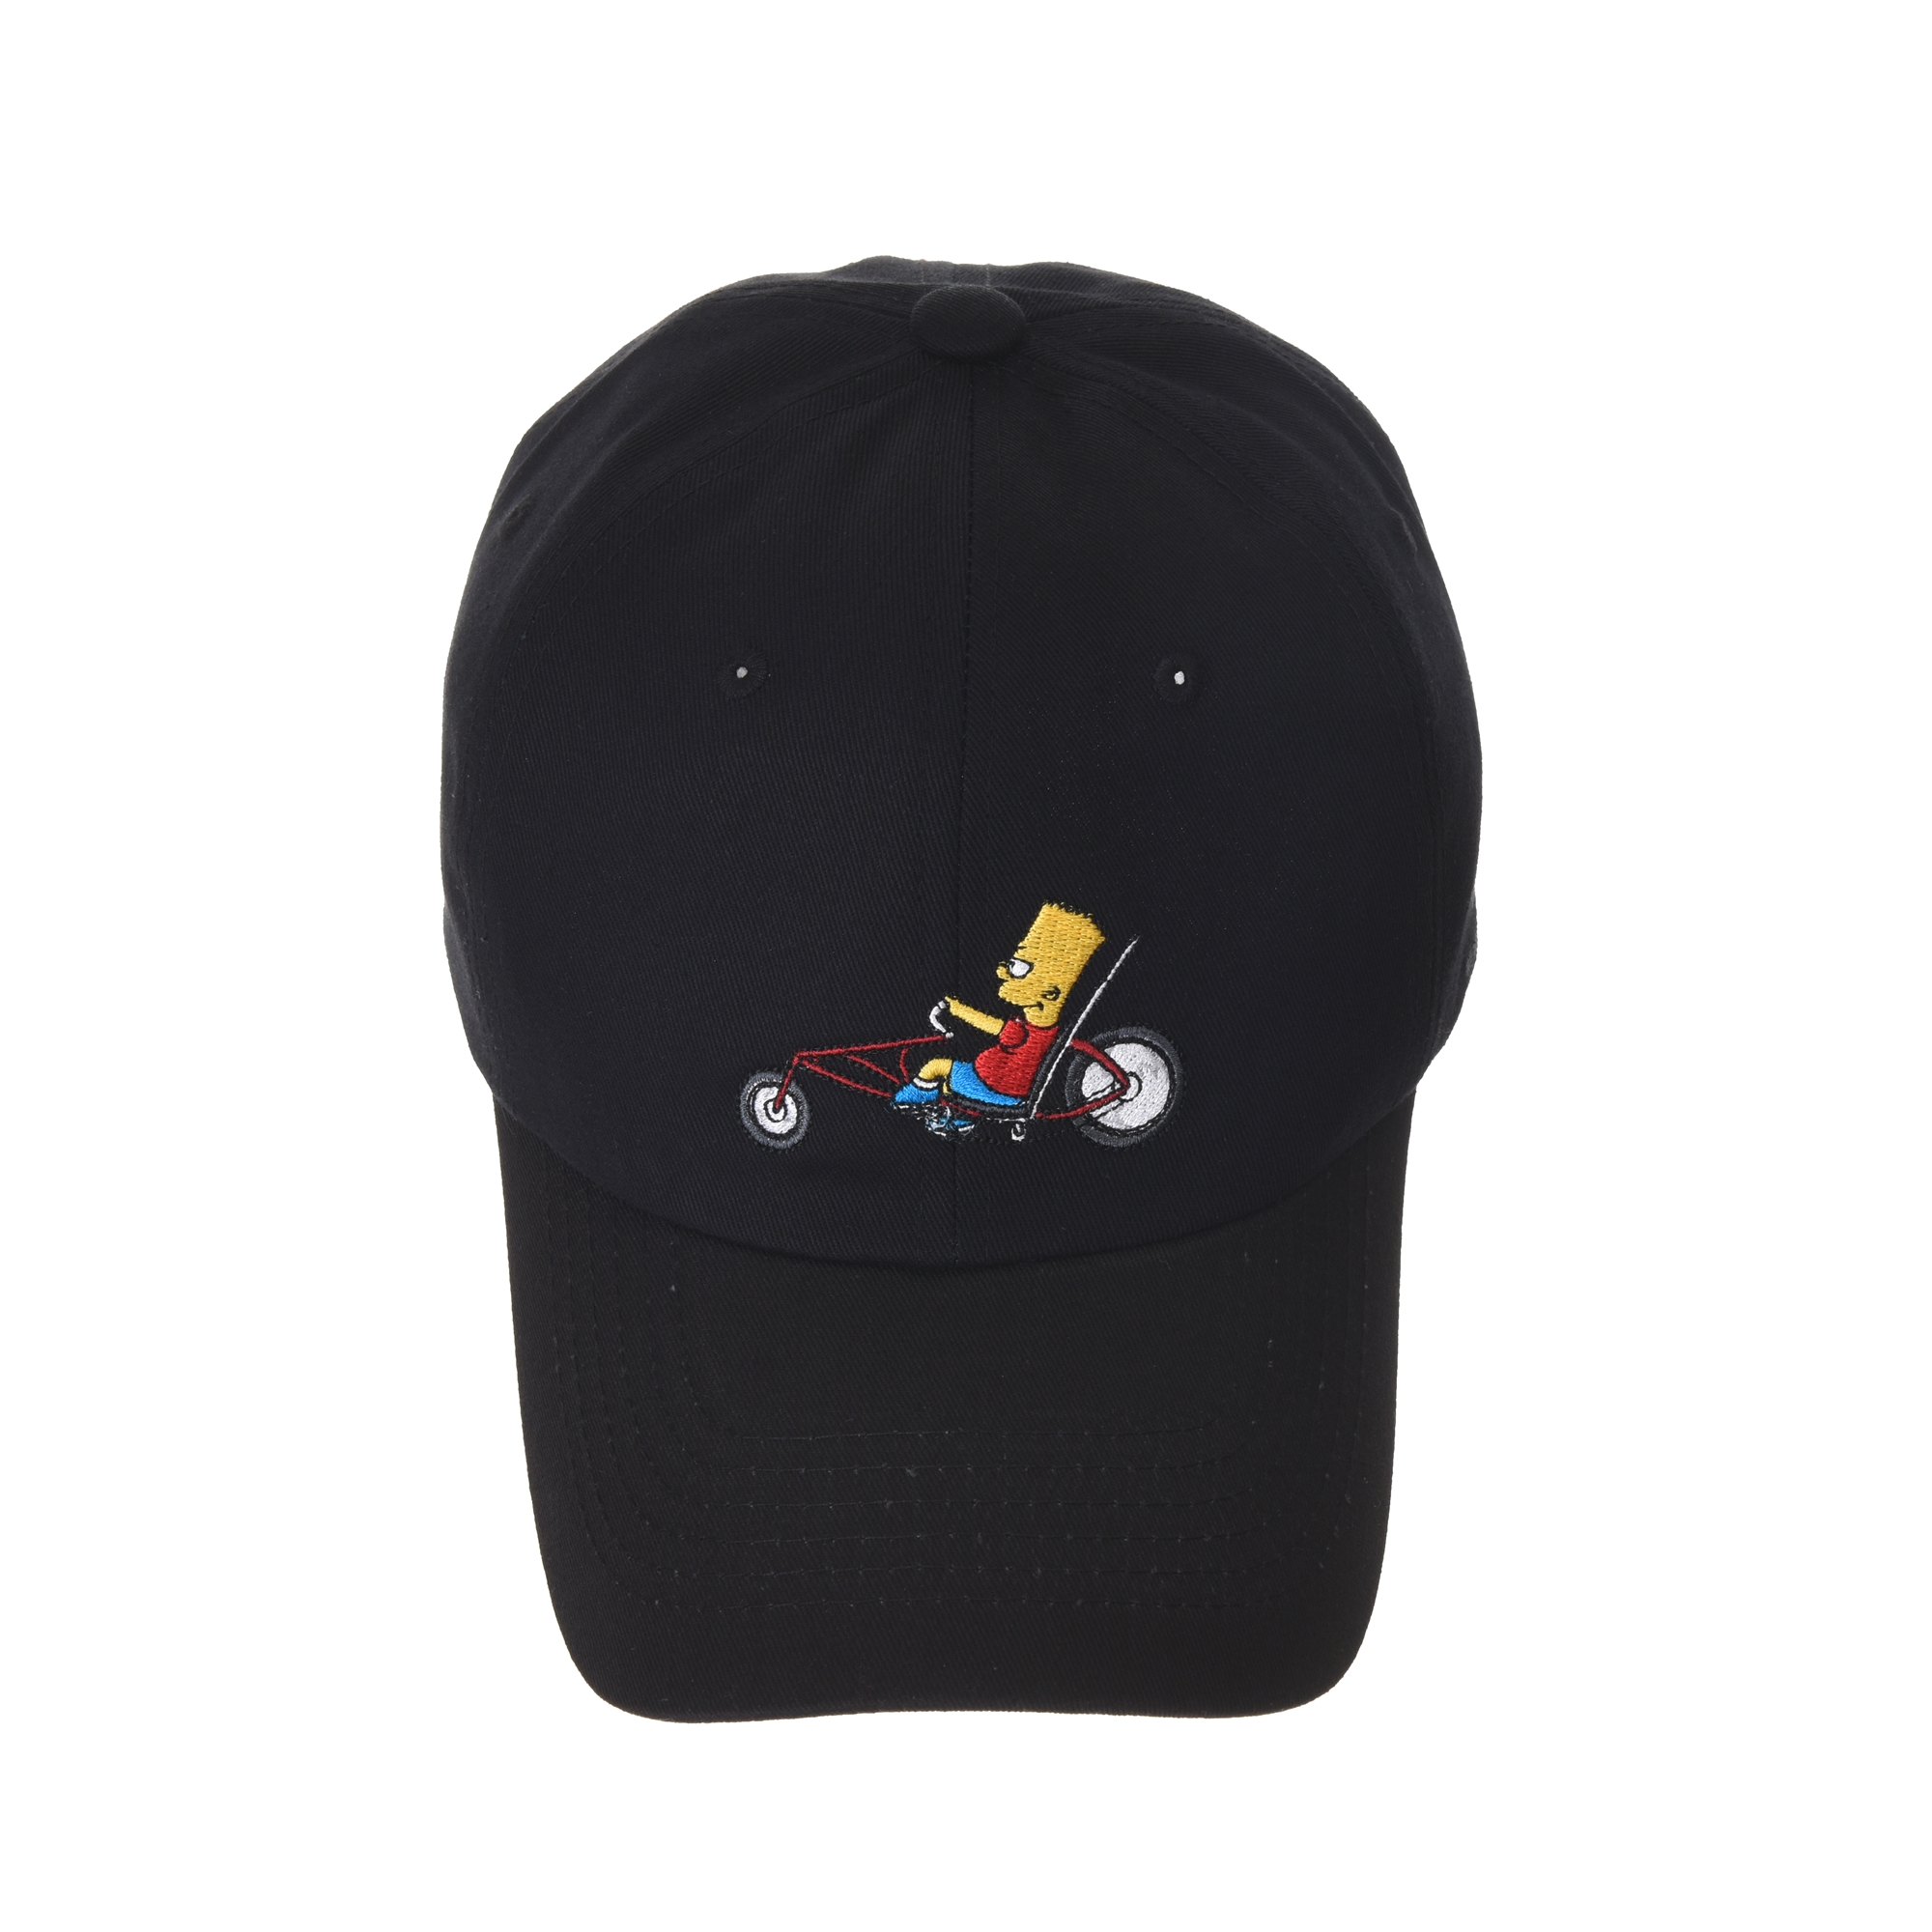 WITHMOONS The Simpsons Baseball Cap Bike Bart Embroidery Hat HL11031 | eBay